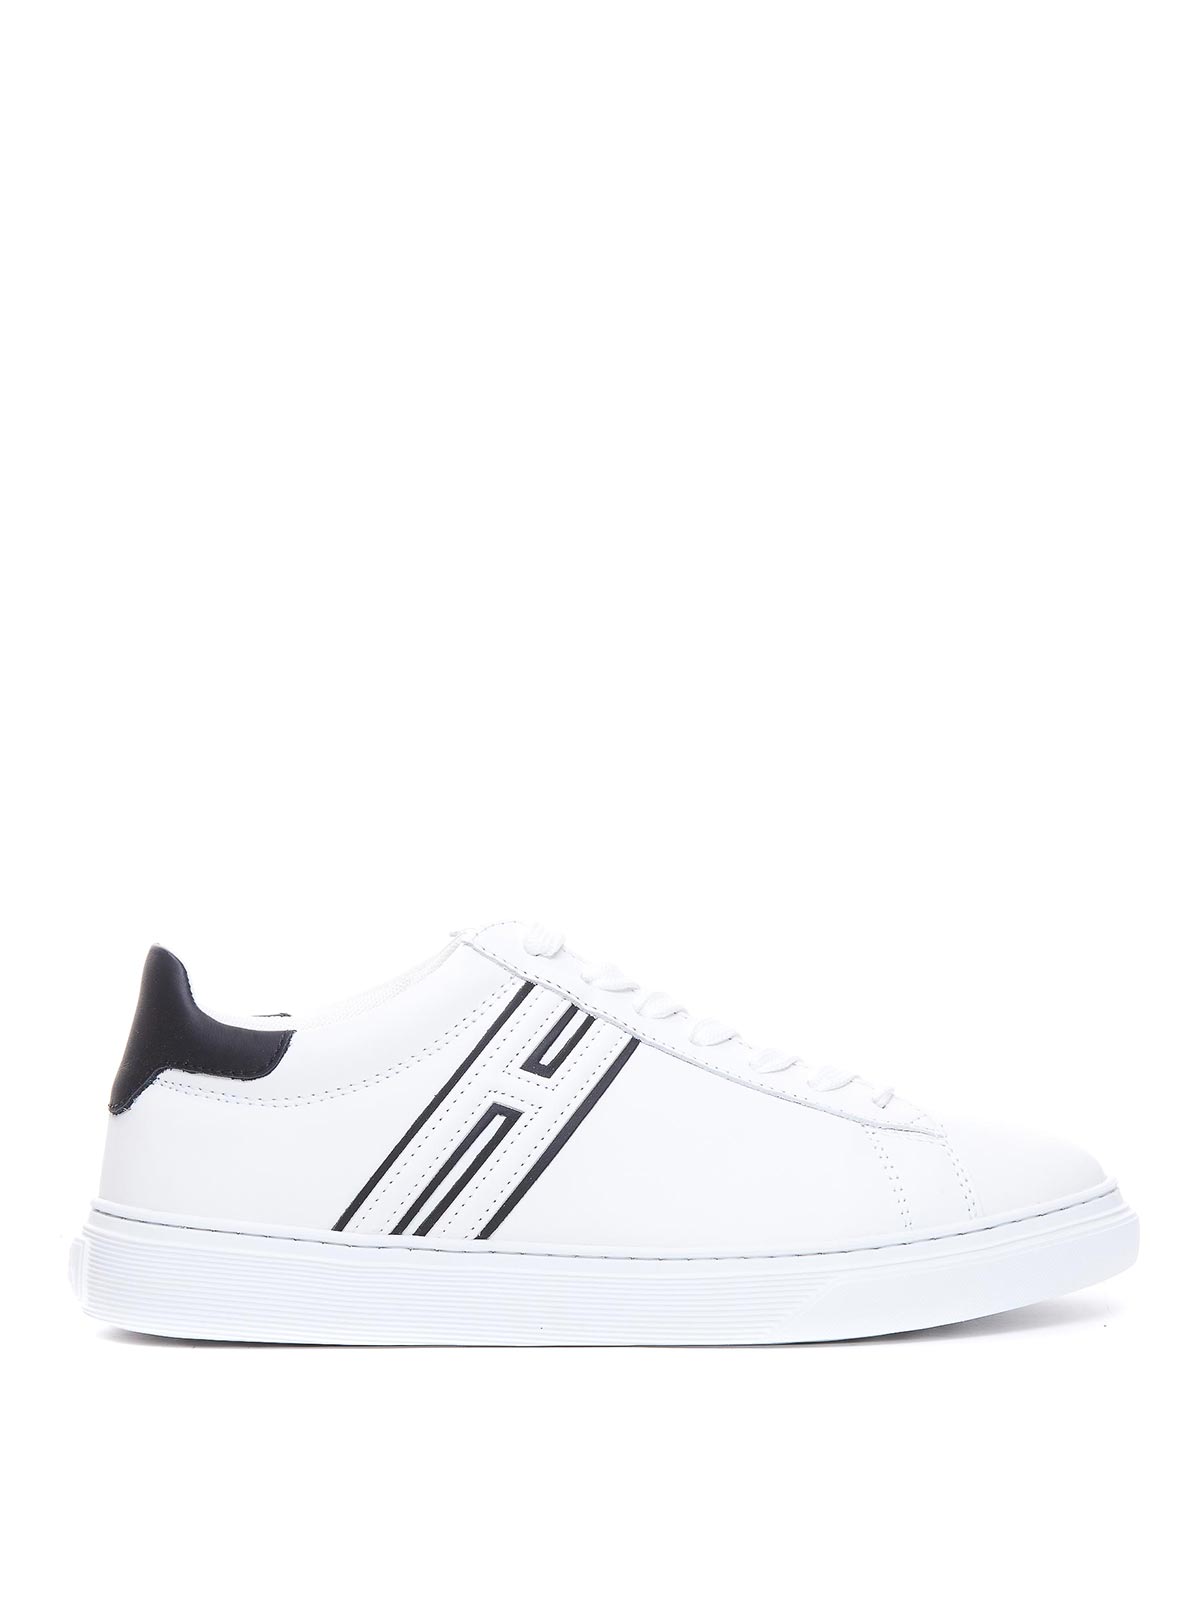 Hogan H365 Trainers In White